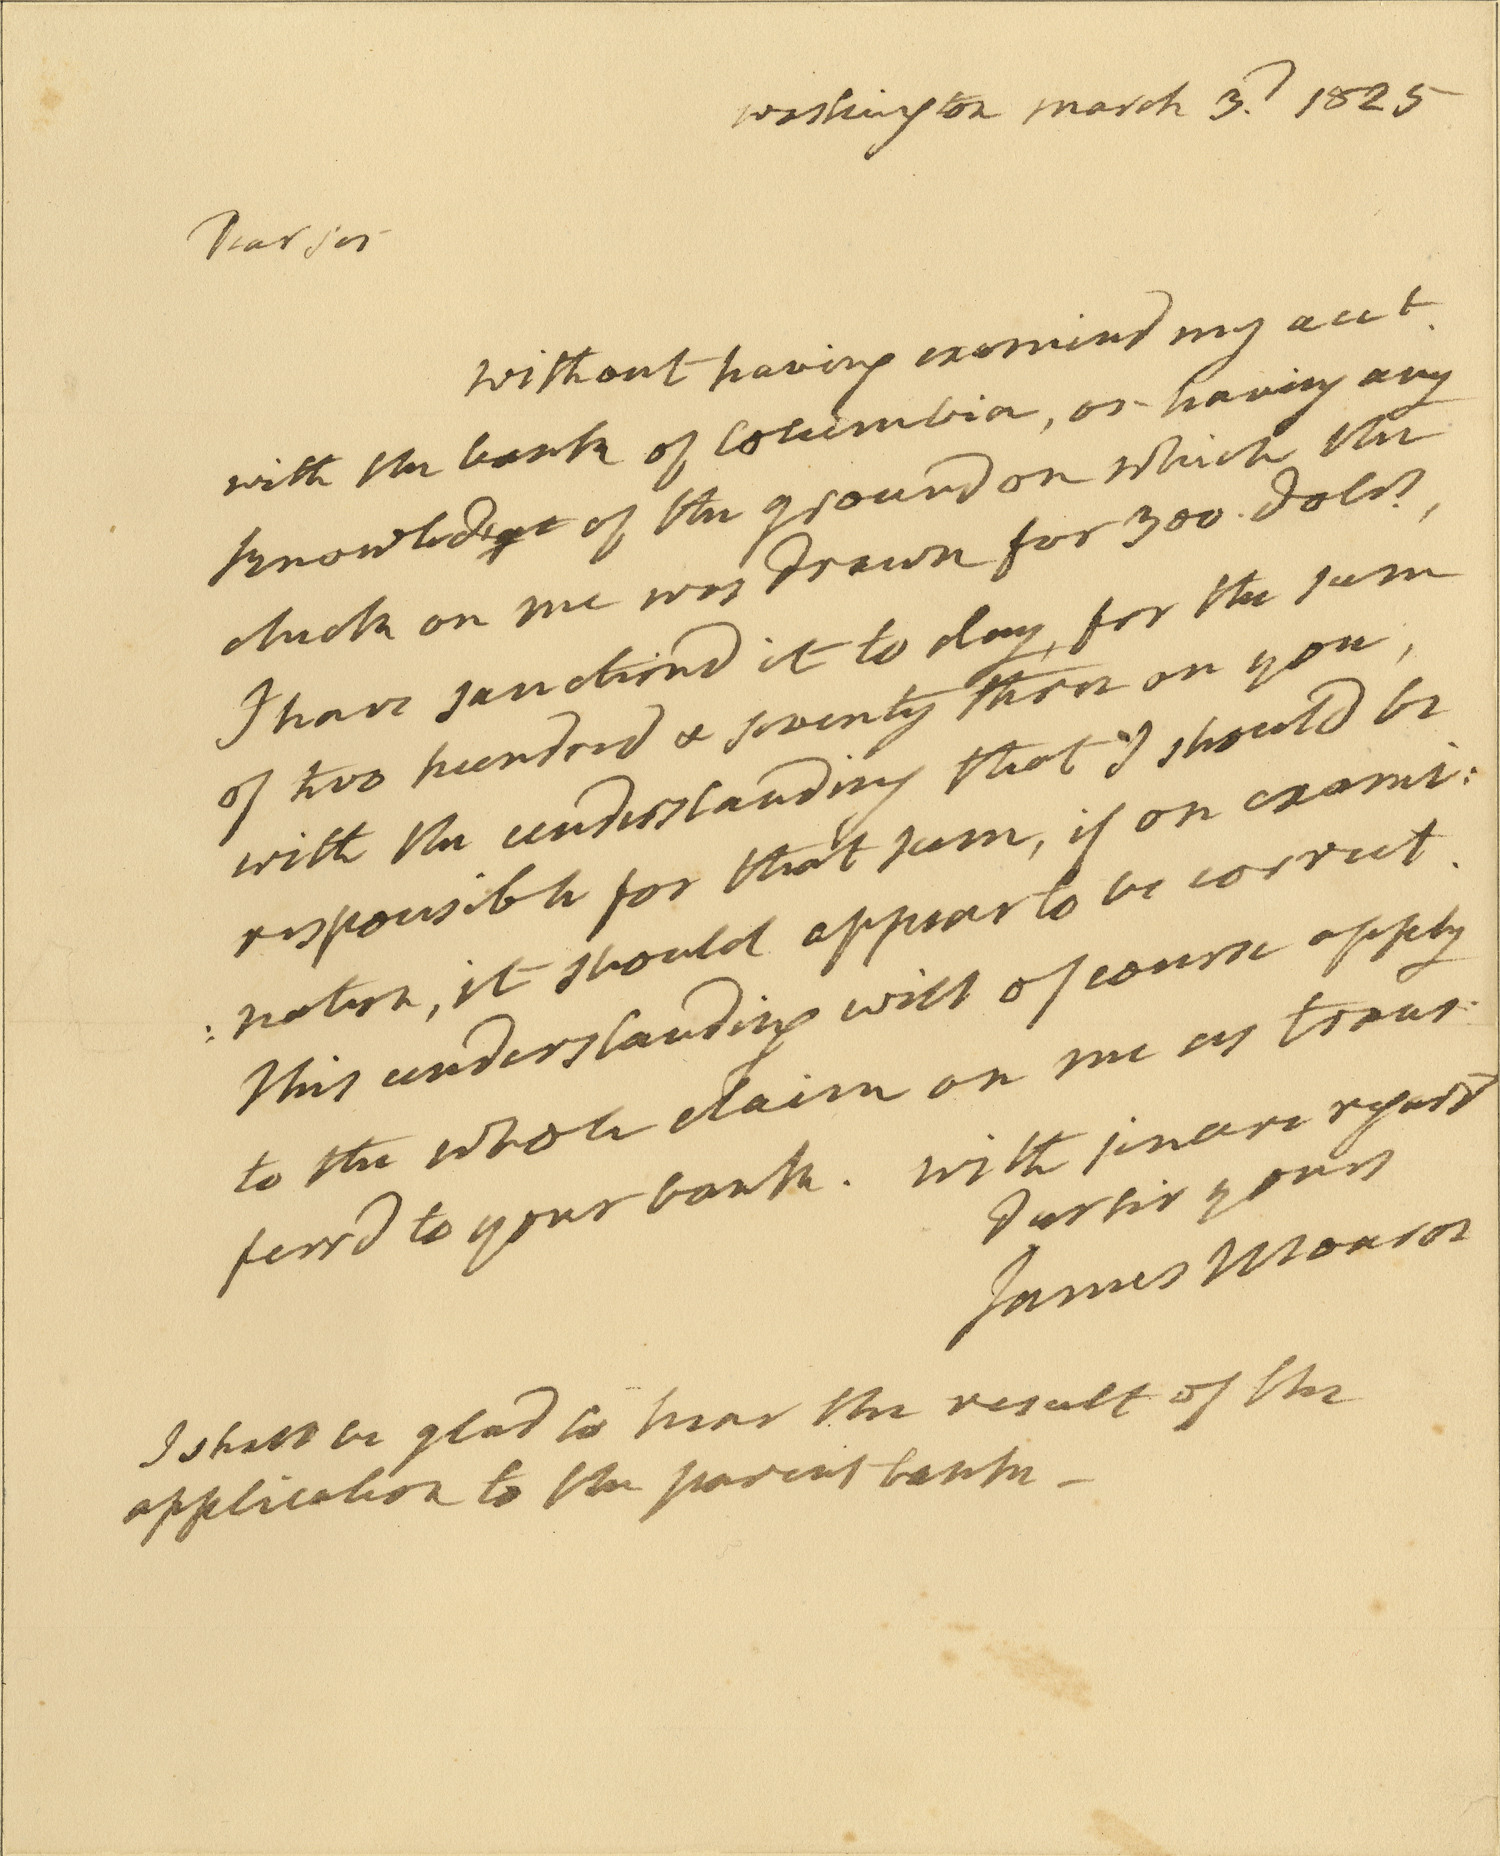 On His Last Day In Office, James Monroe Writes His Bank, Trying To Make Sense Of His Account
